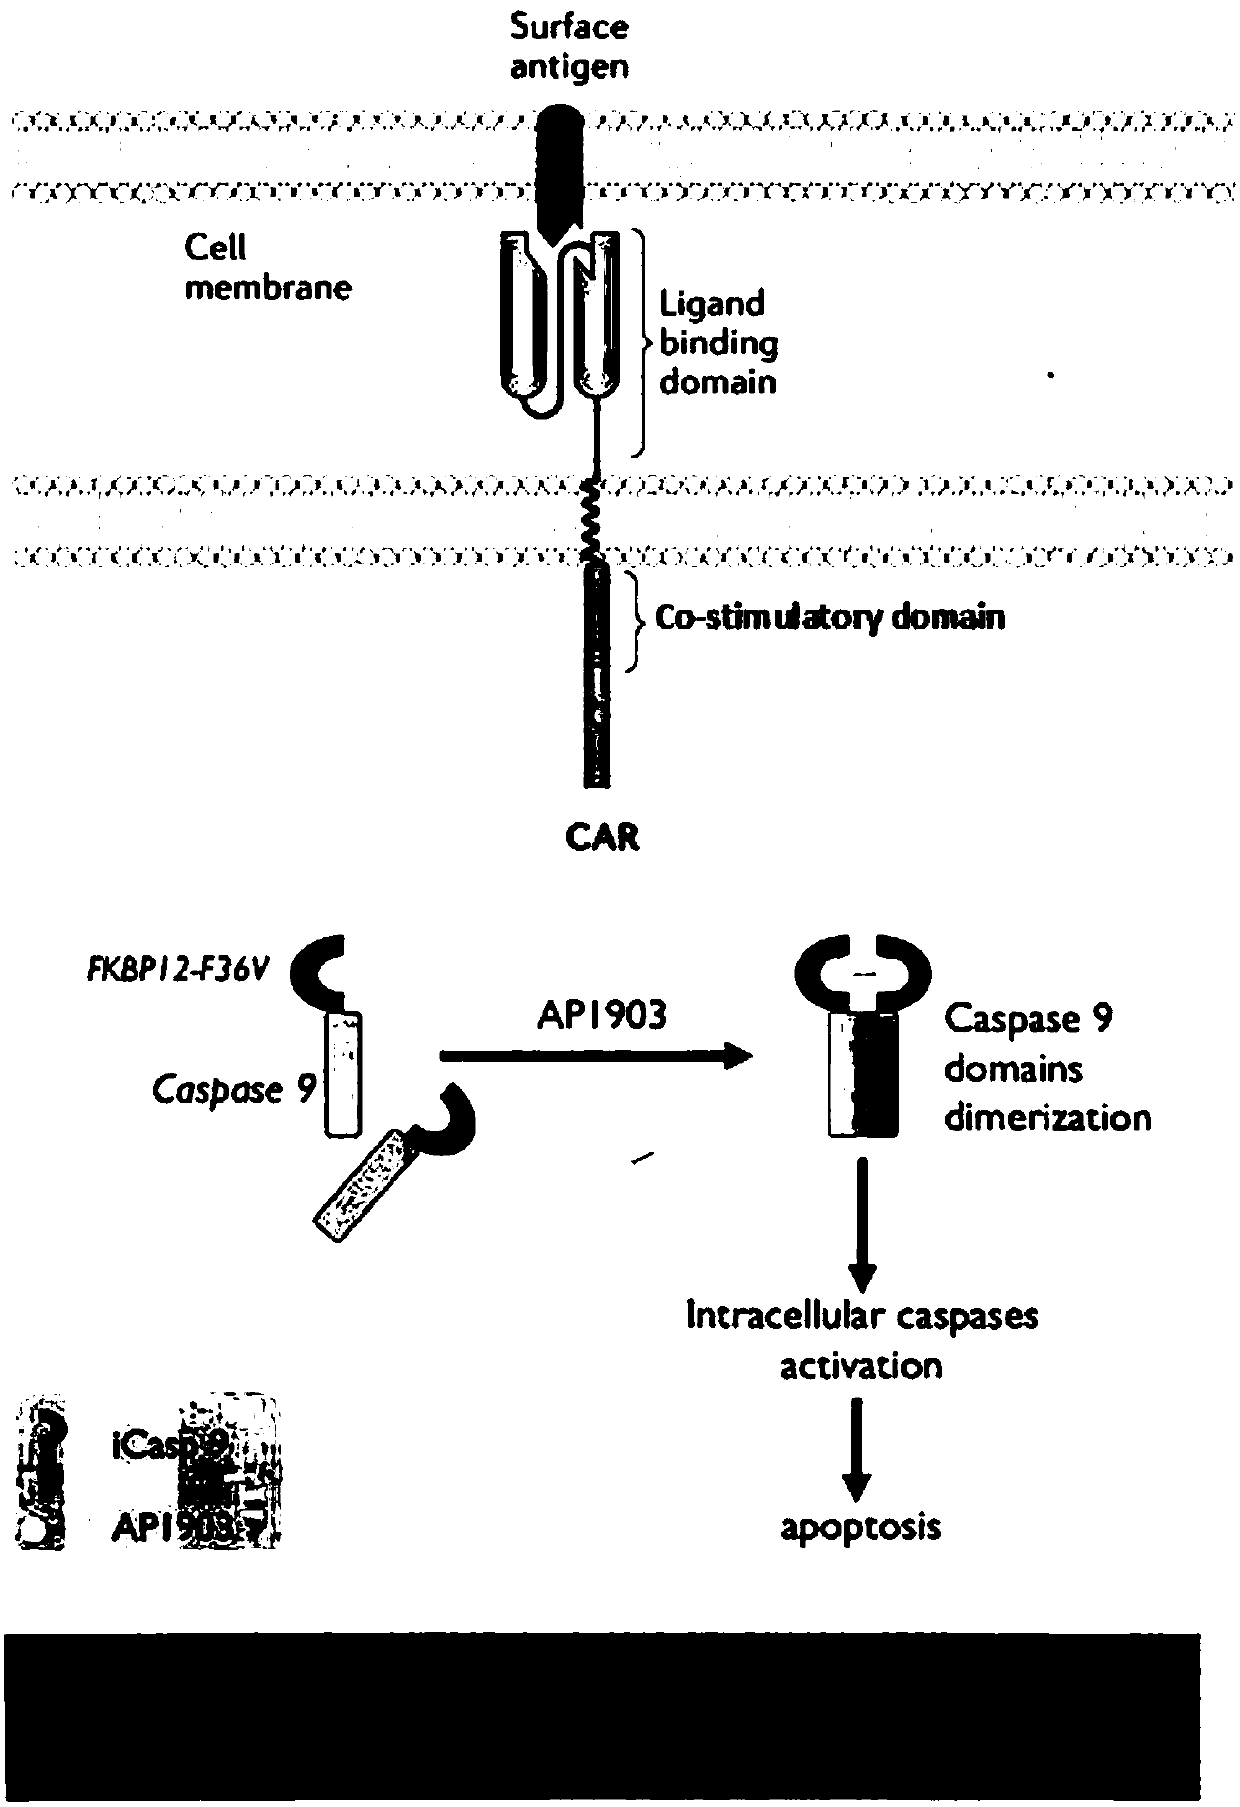 Anti-ROR1 safe chimeric antigen receptor modified immune cell and application thereof